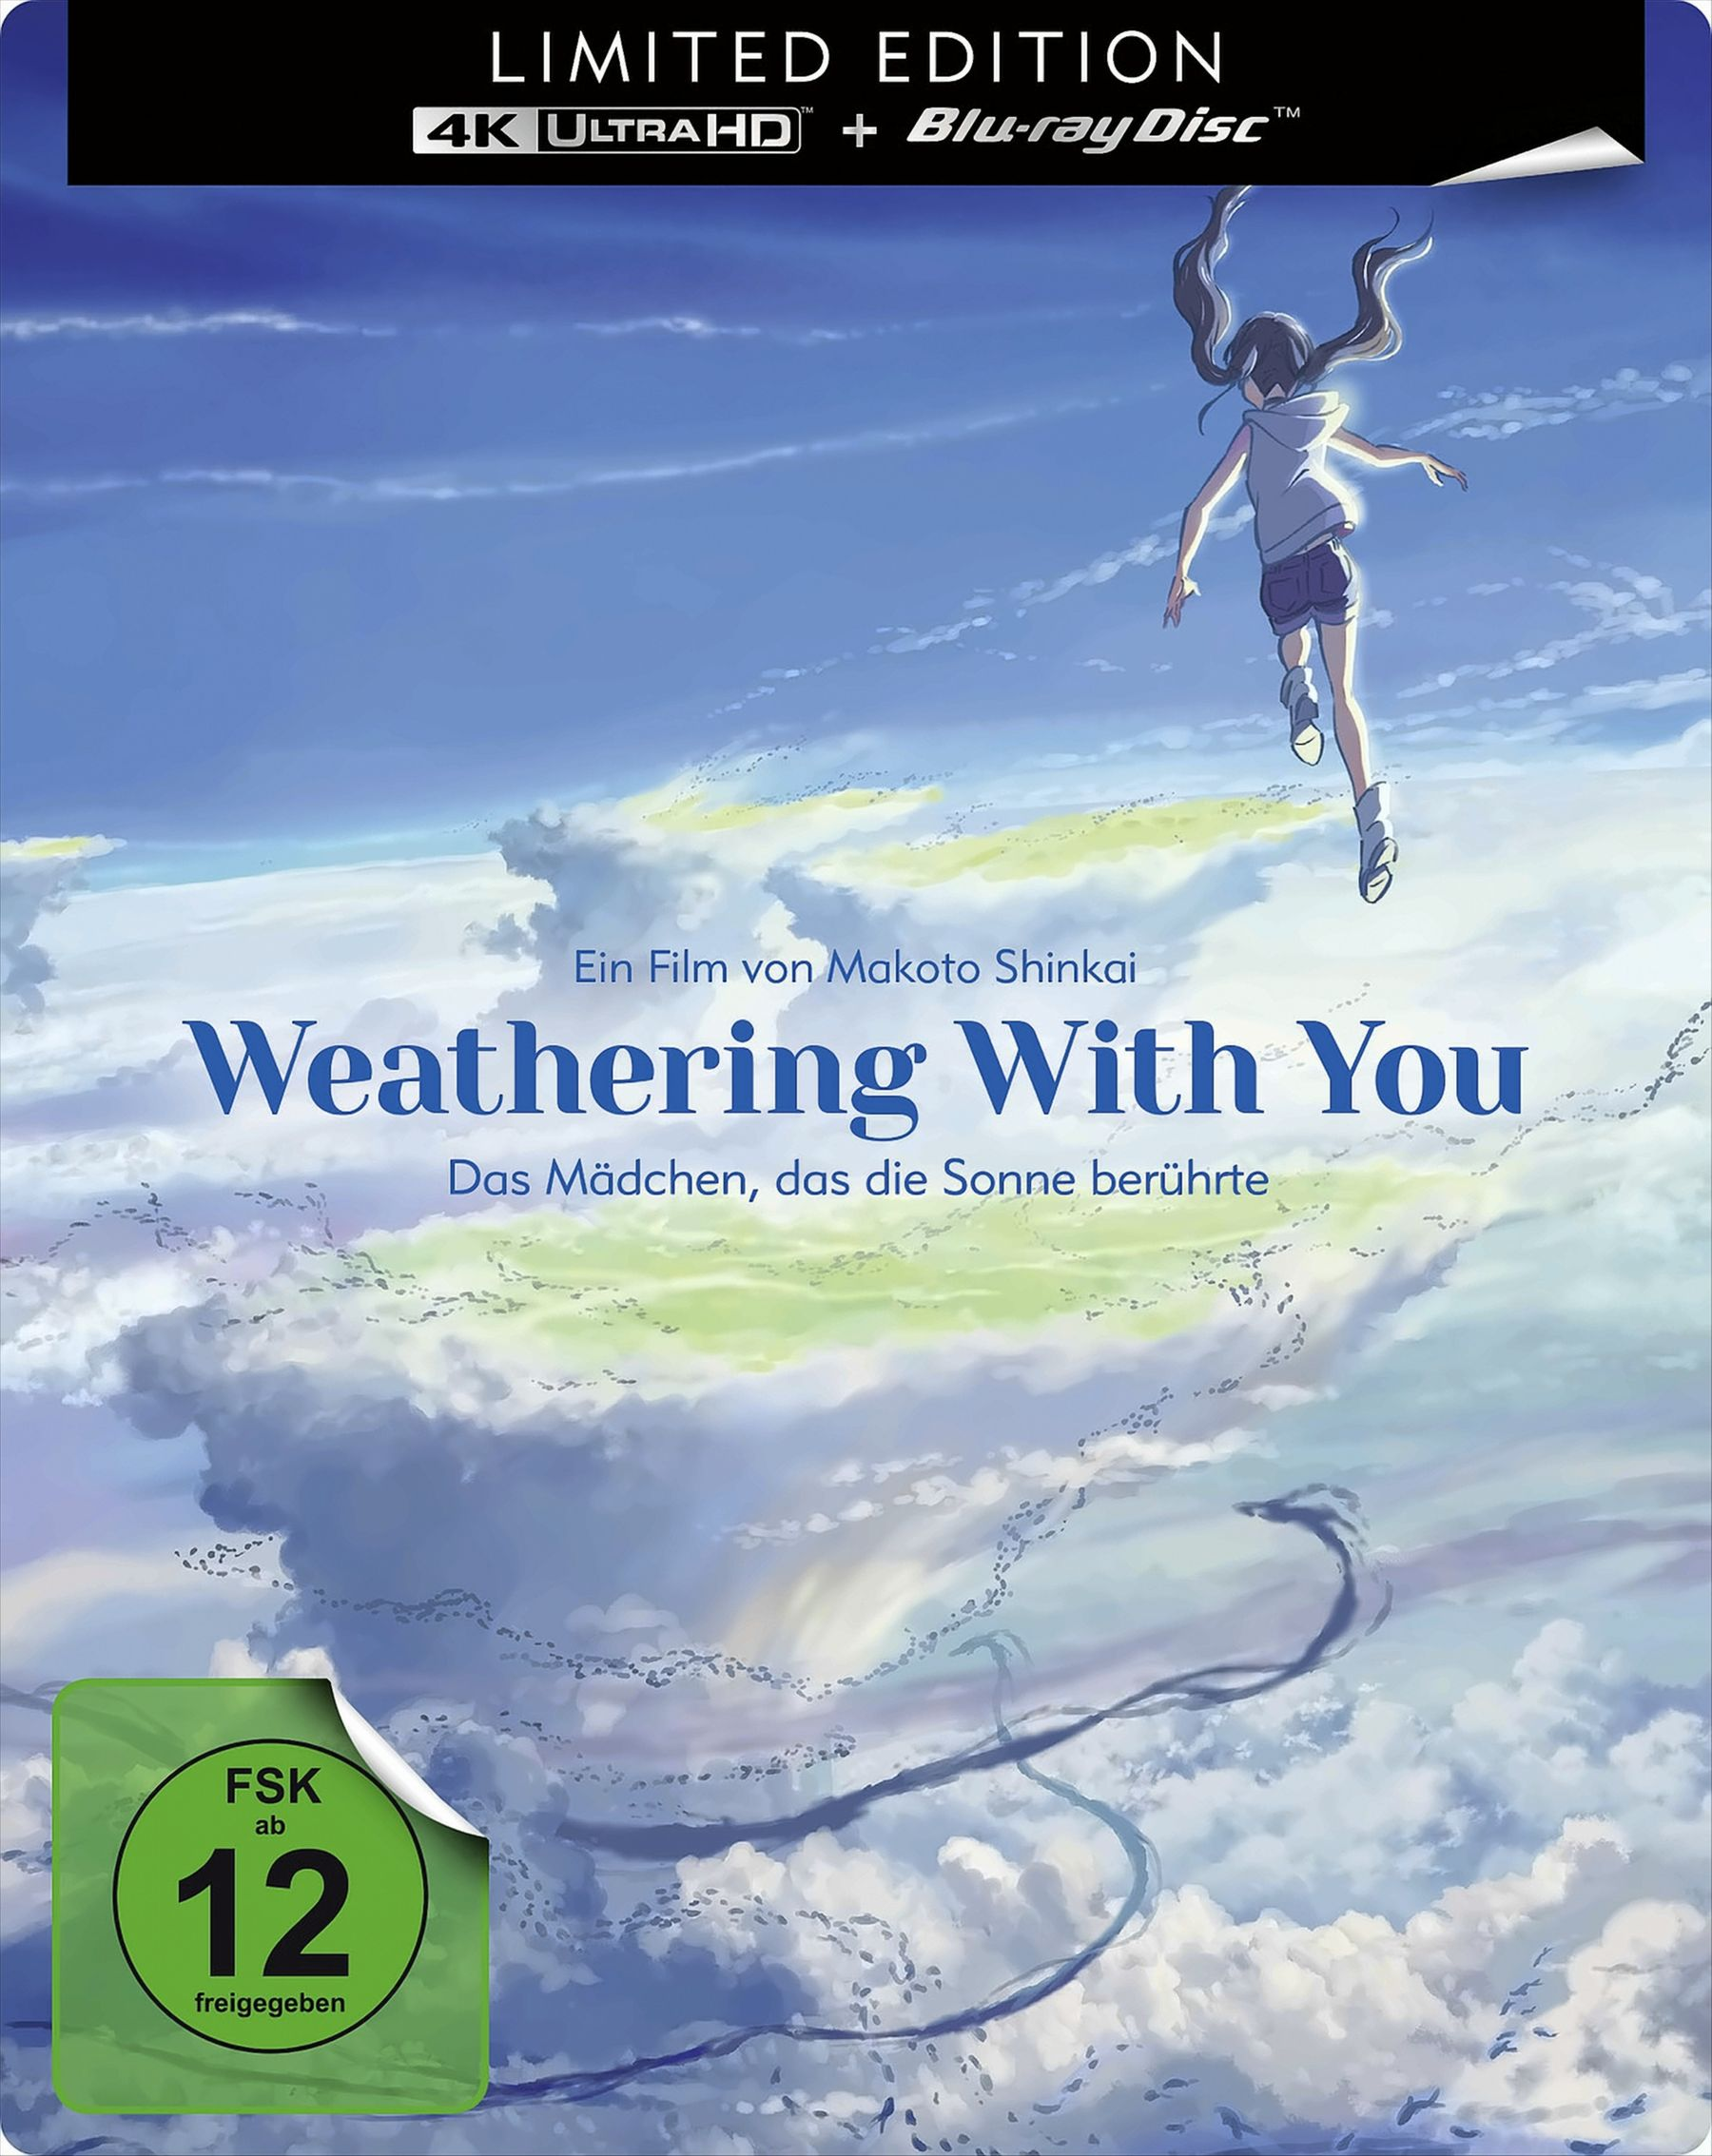 (Steelbook) [Blu-ray] (4K Blu-ray Weathering UHD) - With [Limited You Edition]